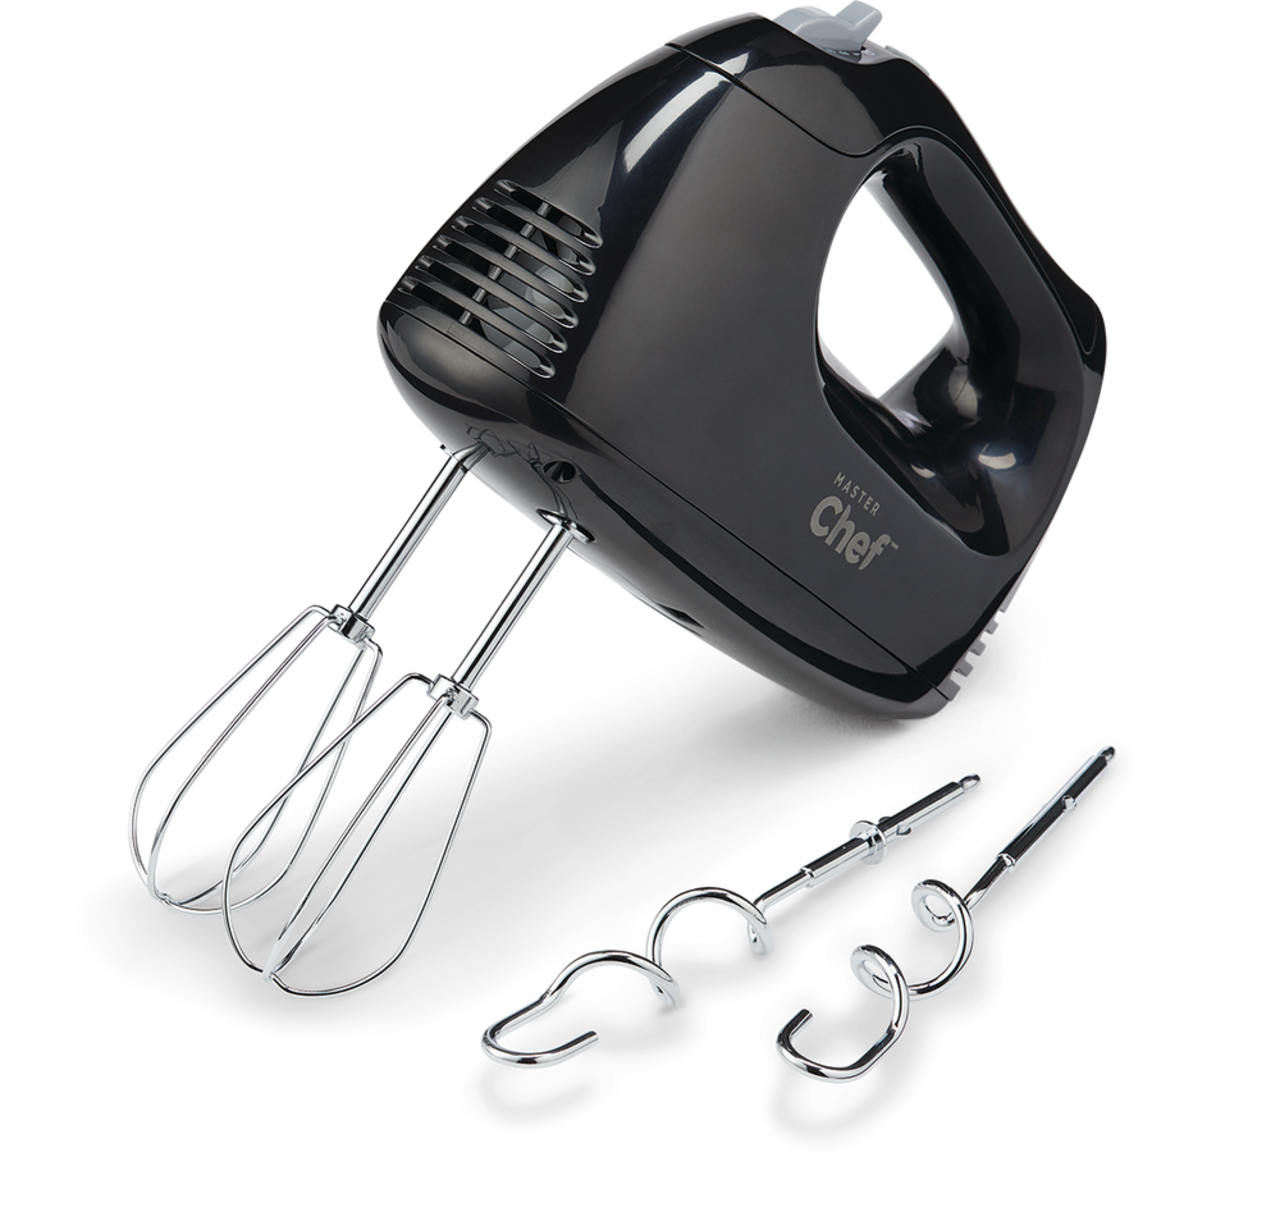 https://media-www.canadiantire.ca/product/living/kitchen/kitchen-appliances/0435775/master-chef-elite-hand-mixer-w-case-f8dd26b1-729e-4059-98b0-0e794041c845.png?imdensity=1&imwidth=640&impolicy=mZoom